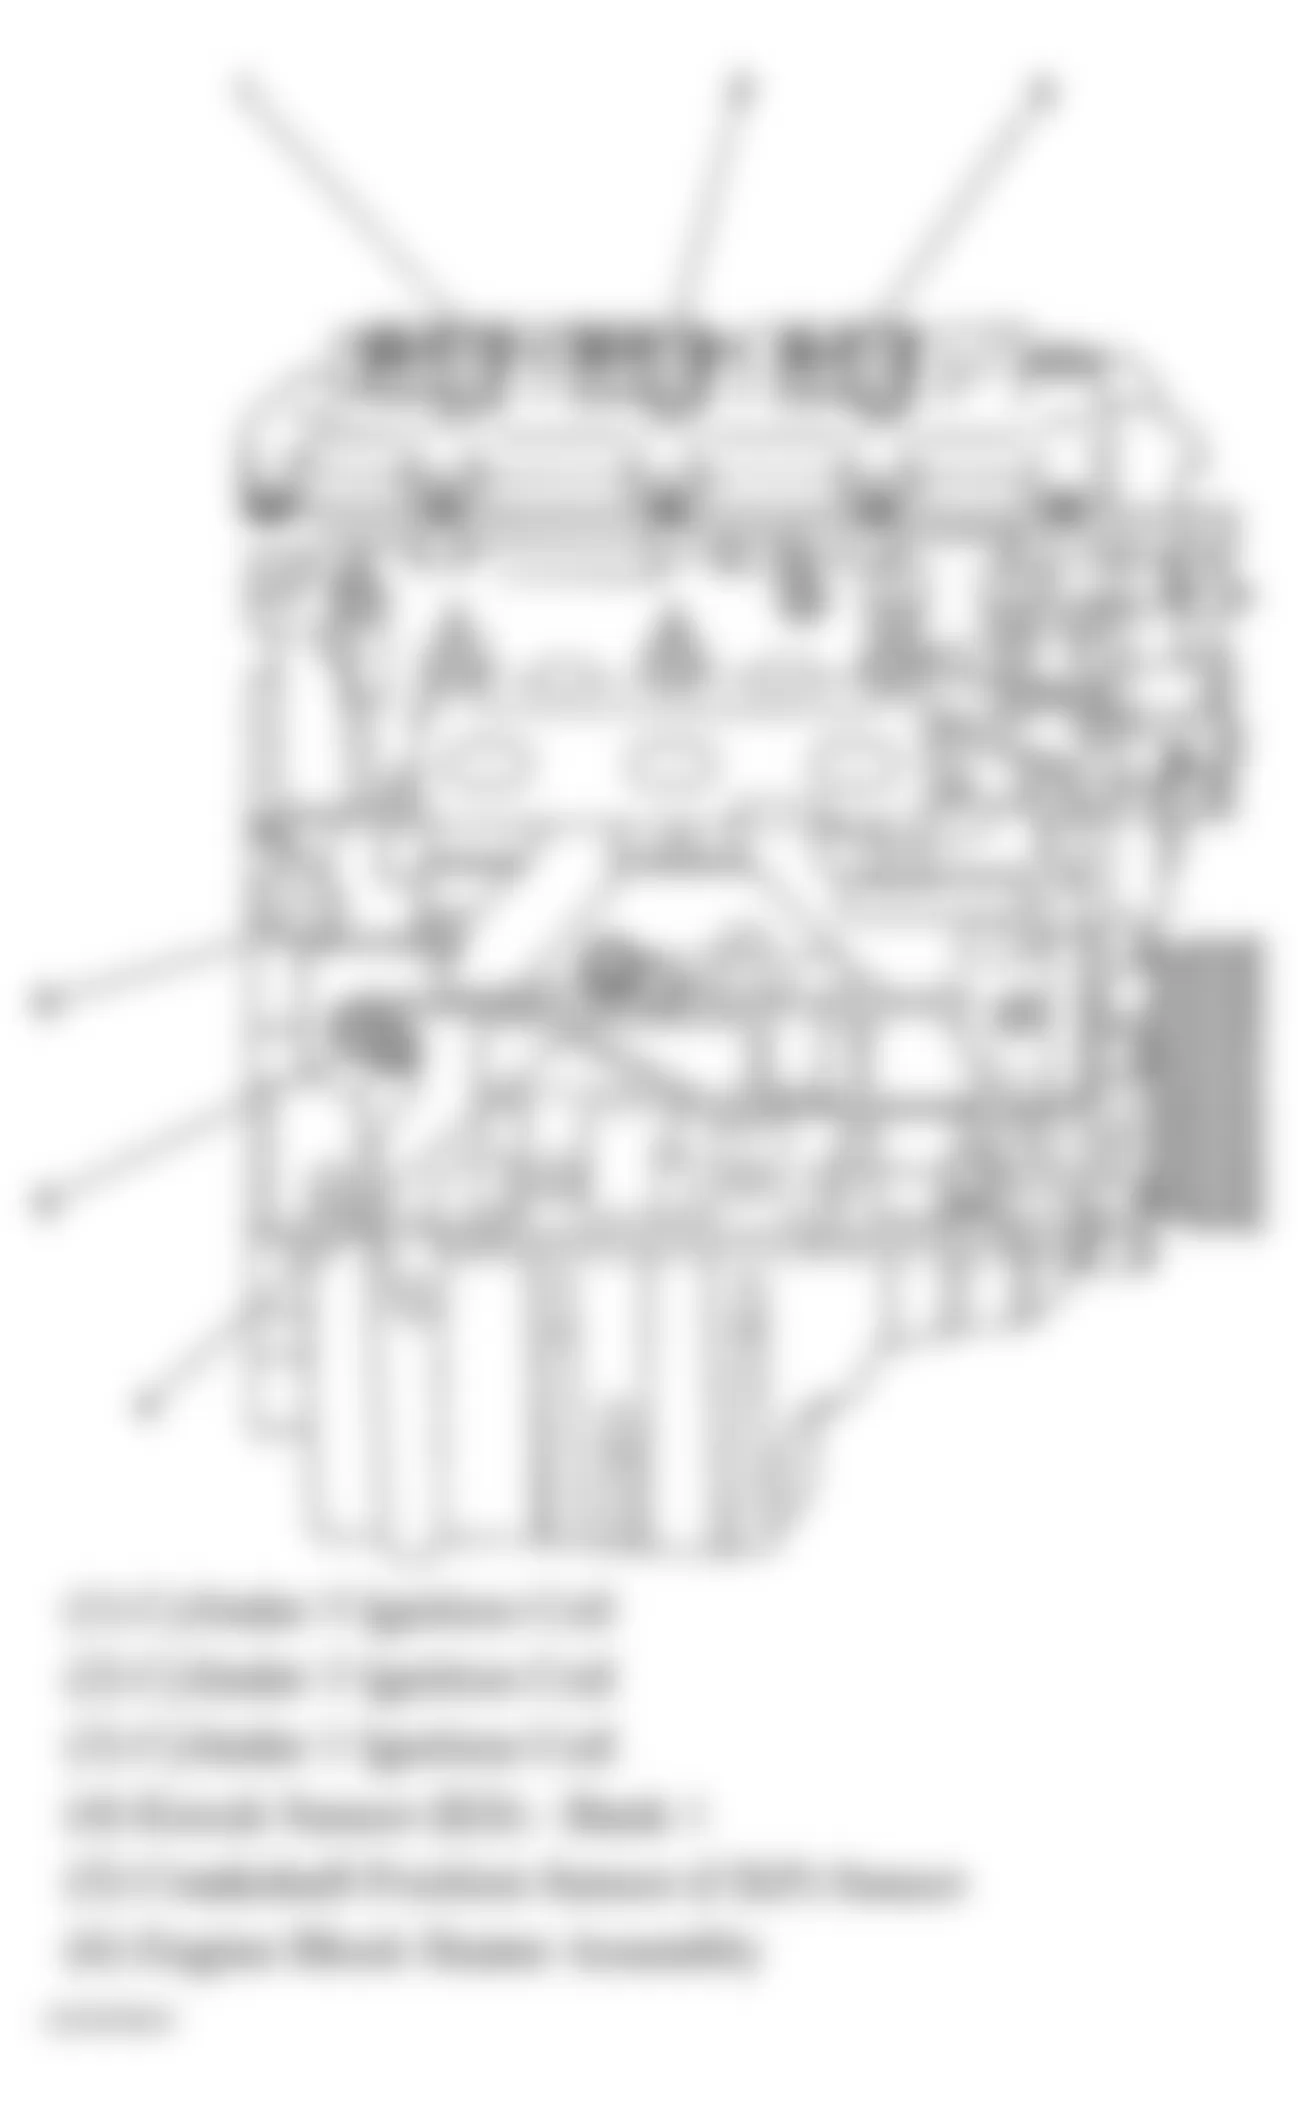 Buick Rendezvous Ultra 2005 - Component Locations -  Left Side Of Engine (3.6L)